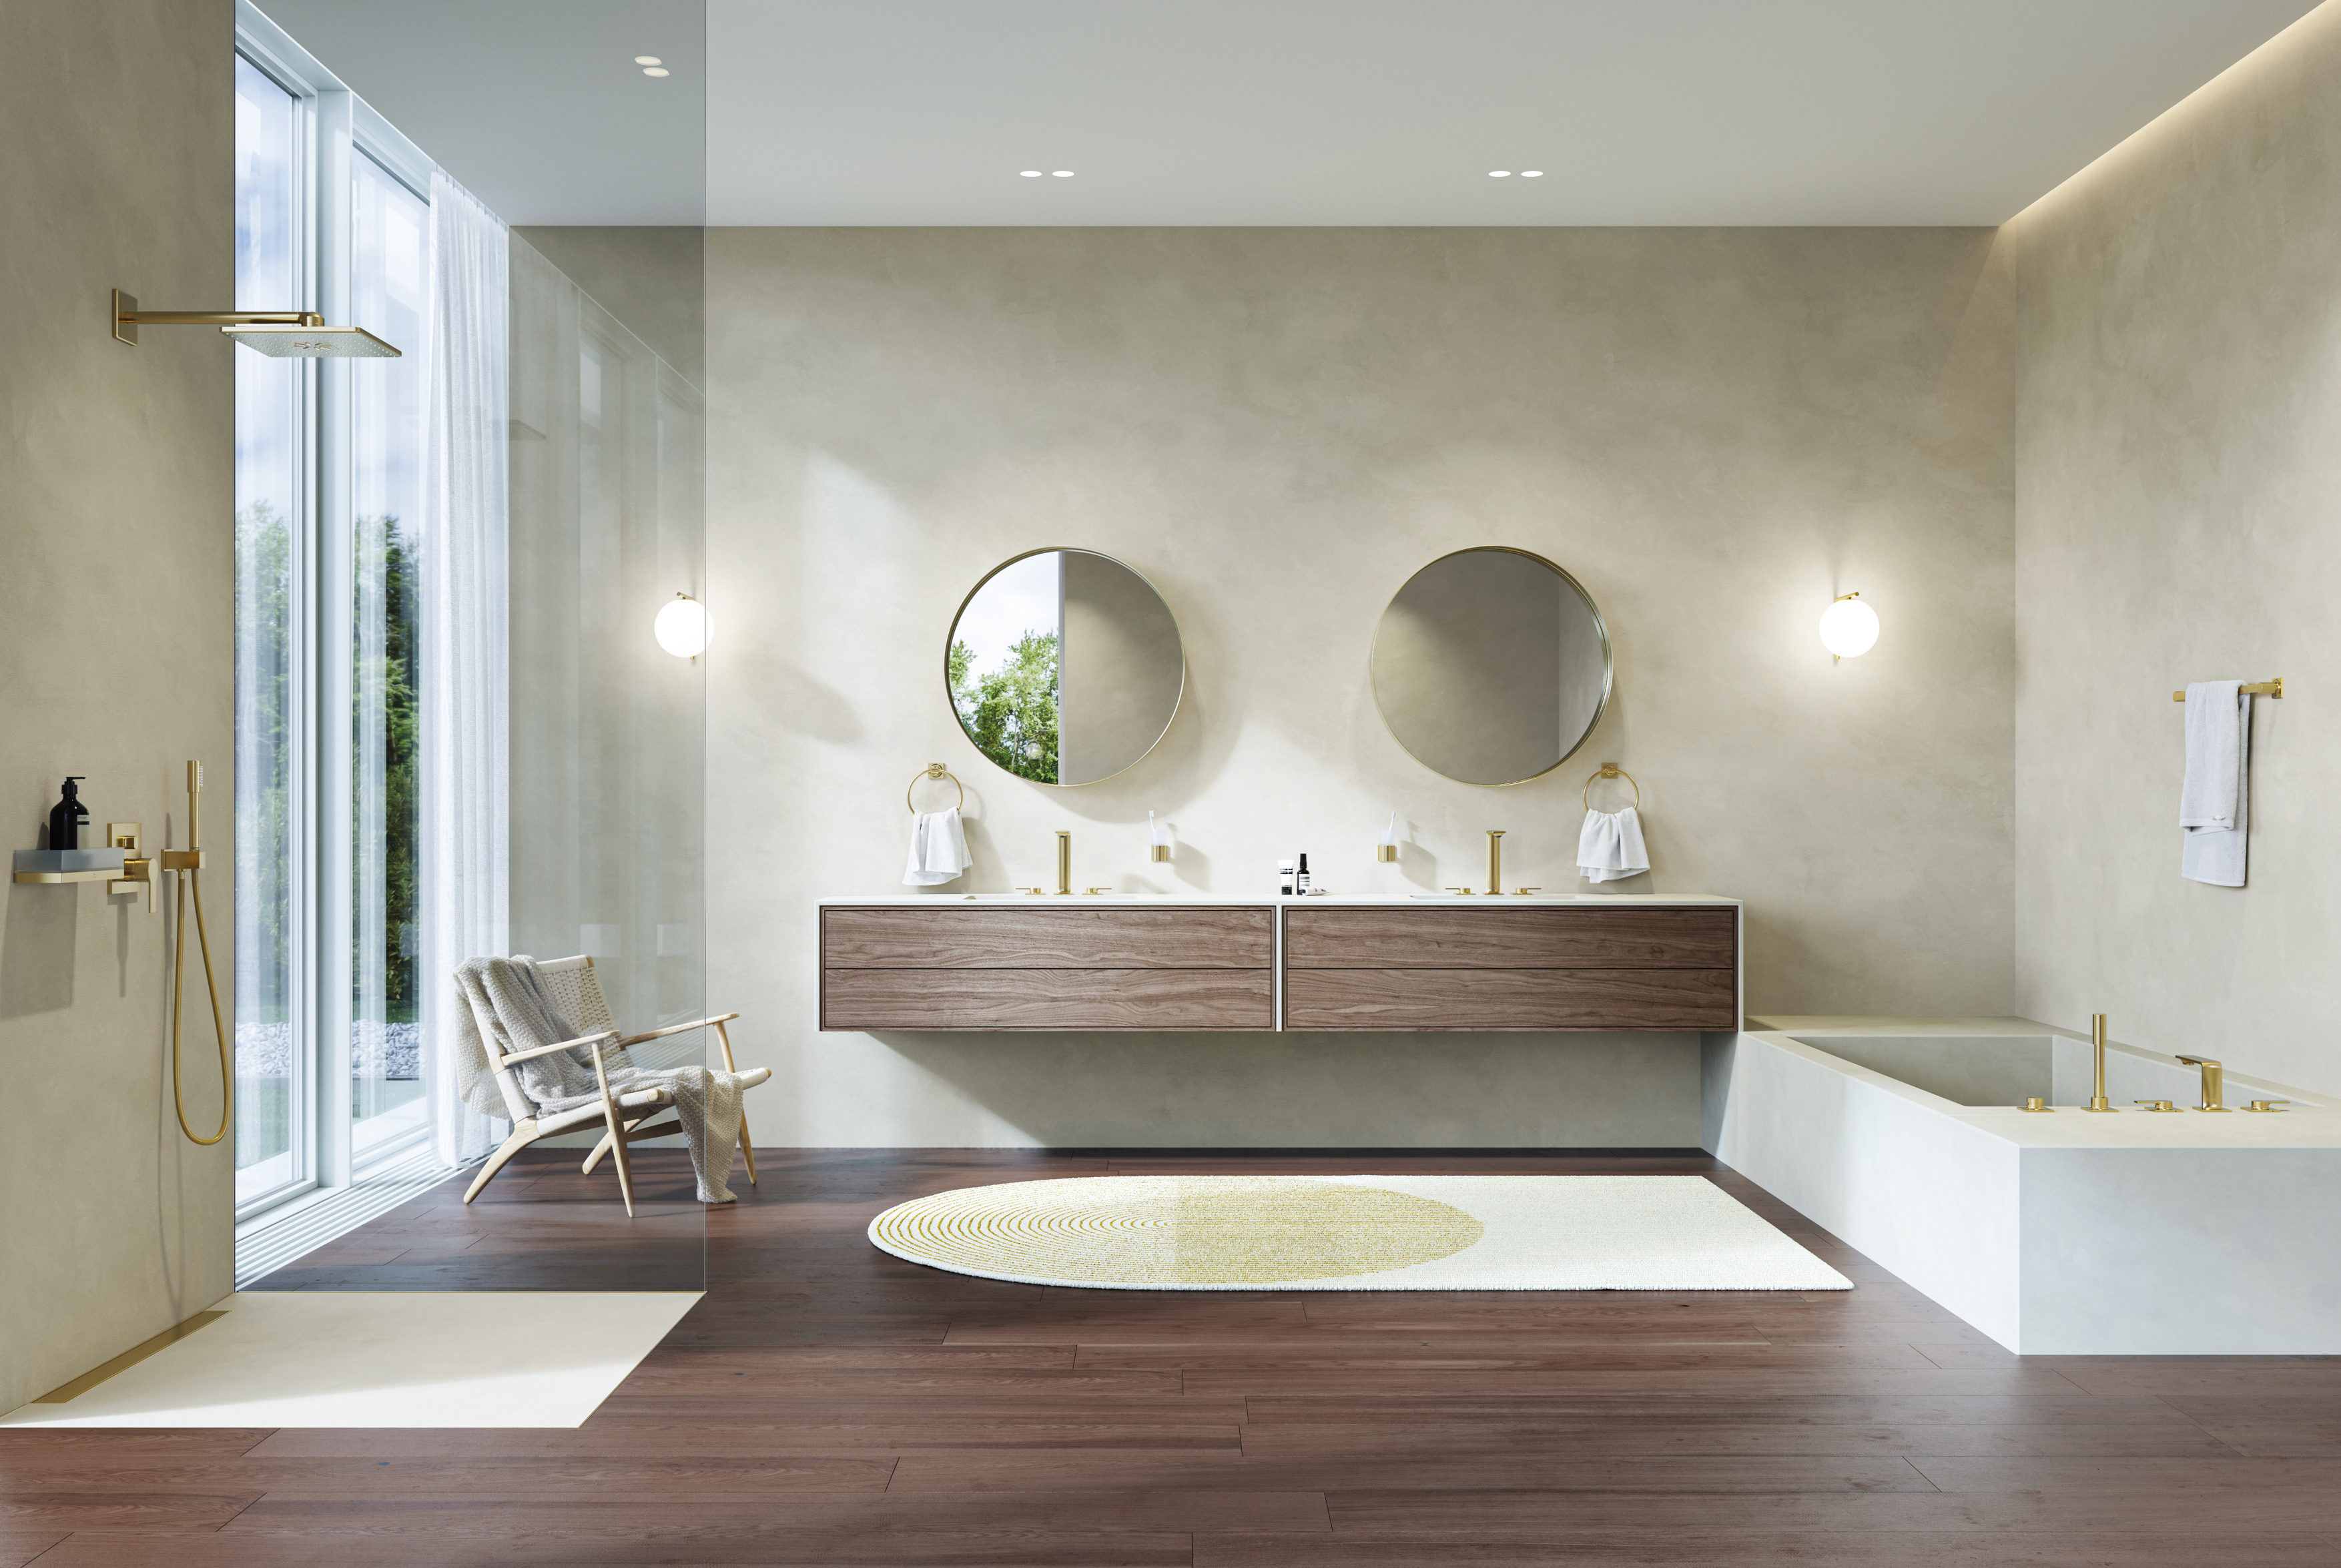 GROHE NEW ALLURE COLORS AND FINISHES